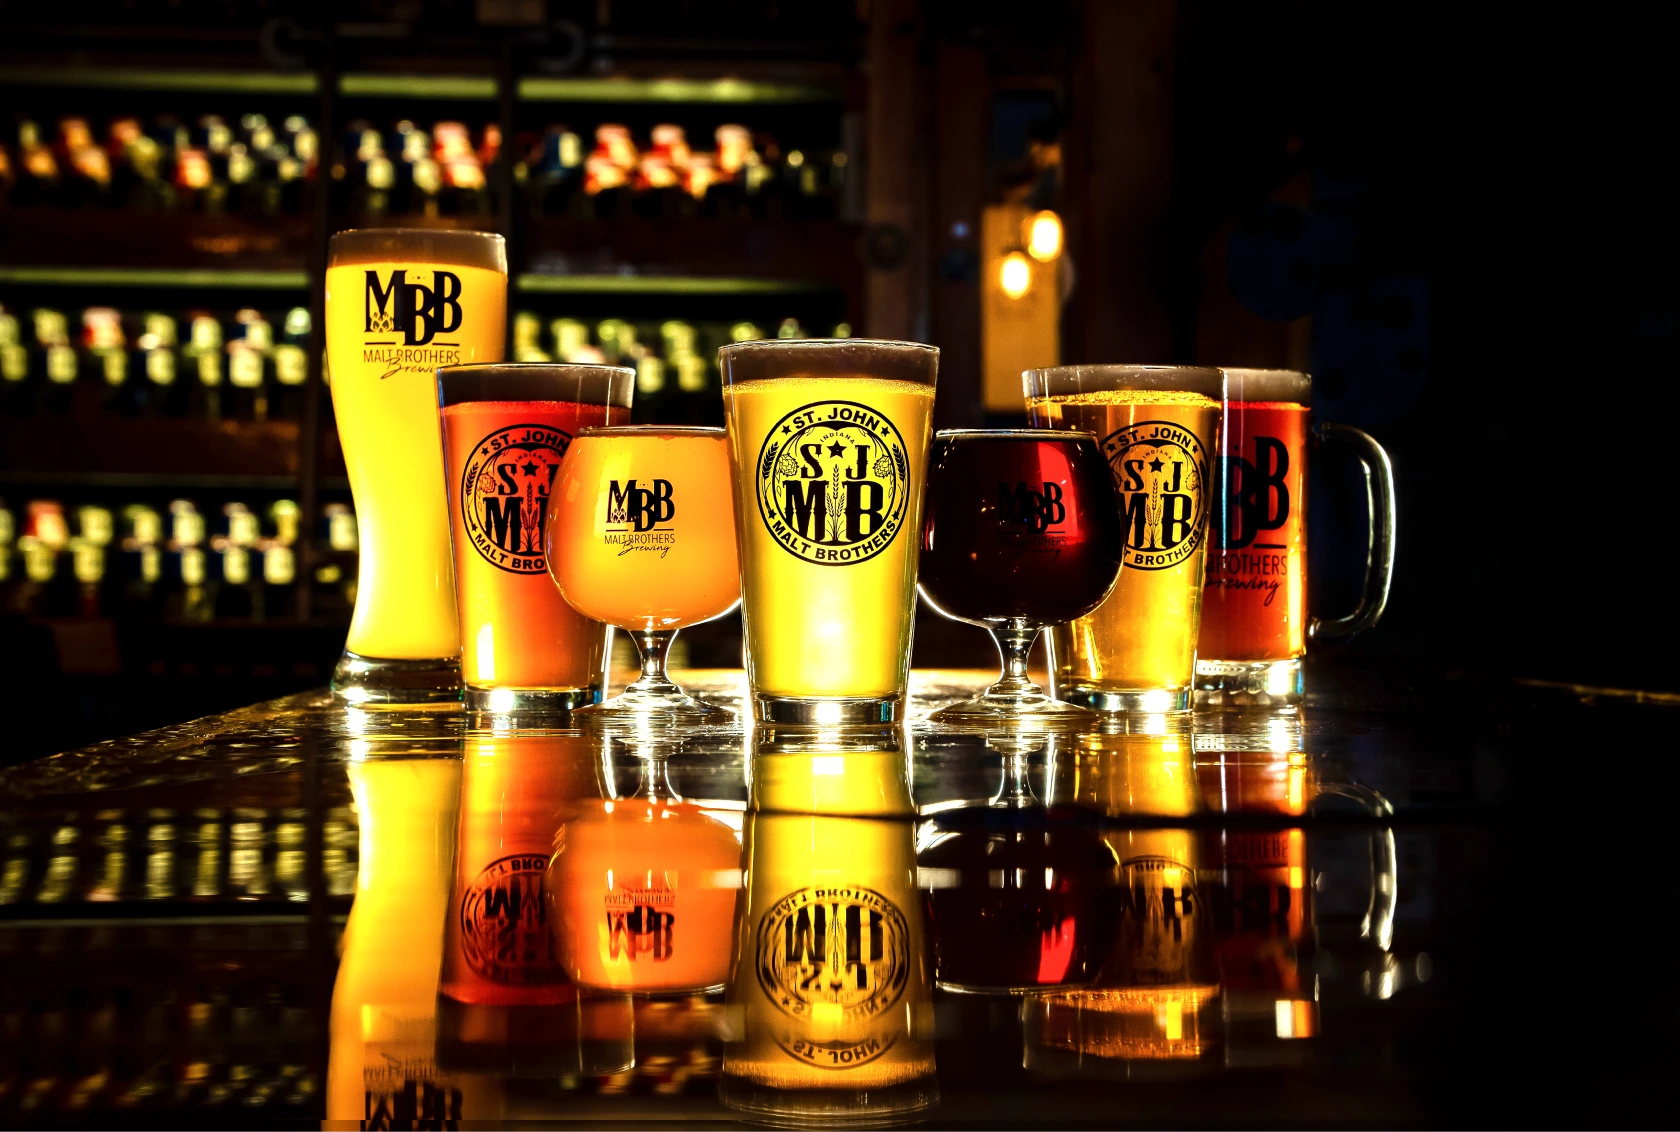 Malt Brothers Brewery Pints Image